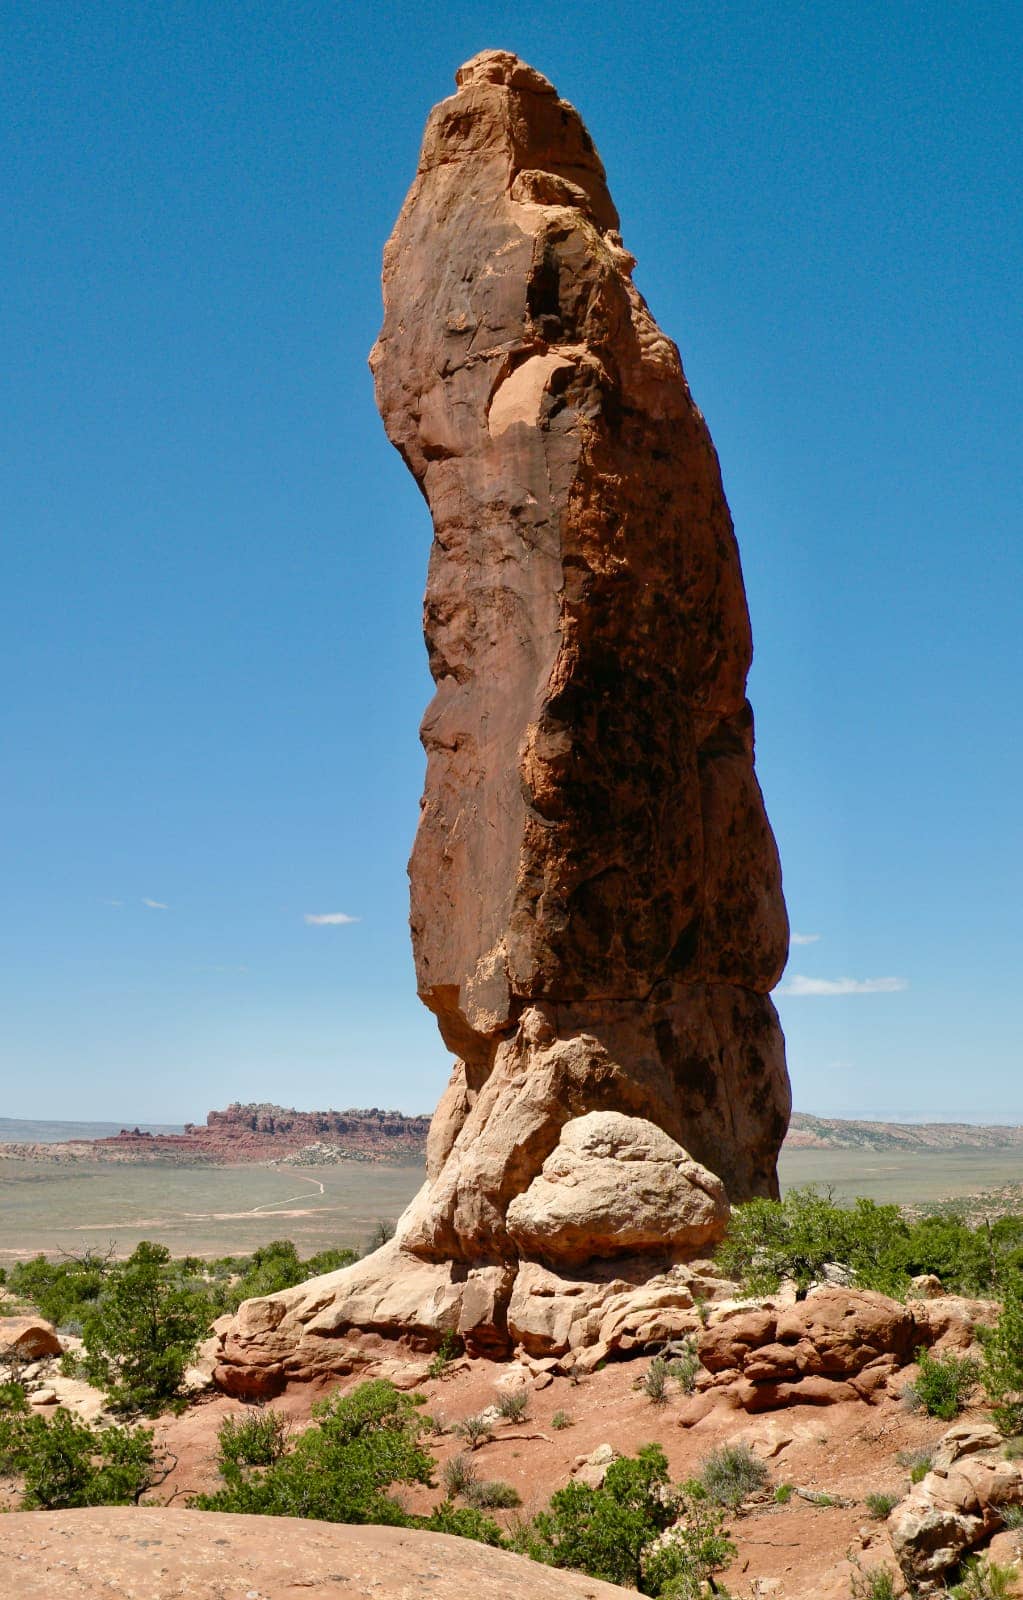 Tall and narrow rock formation in foreground with blue sky in background